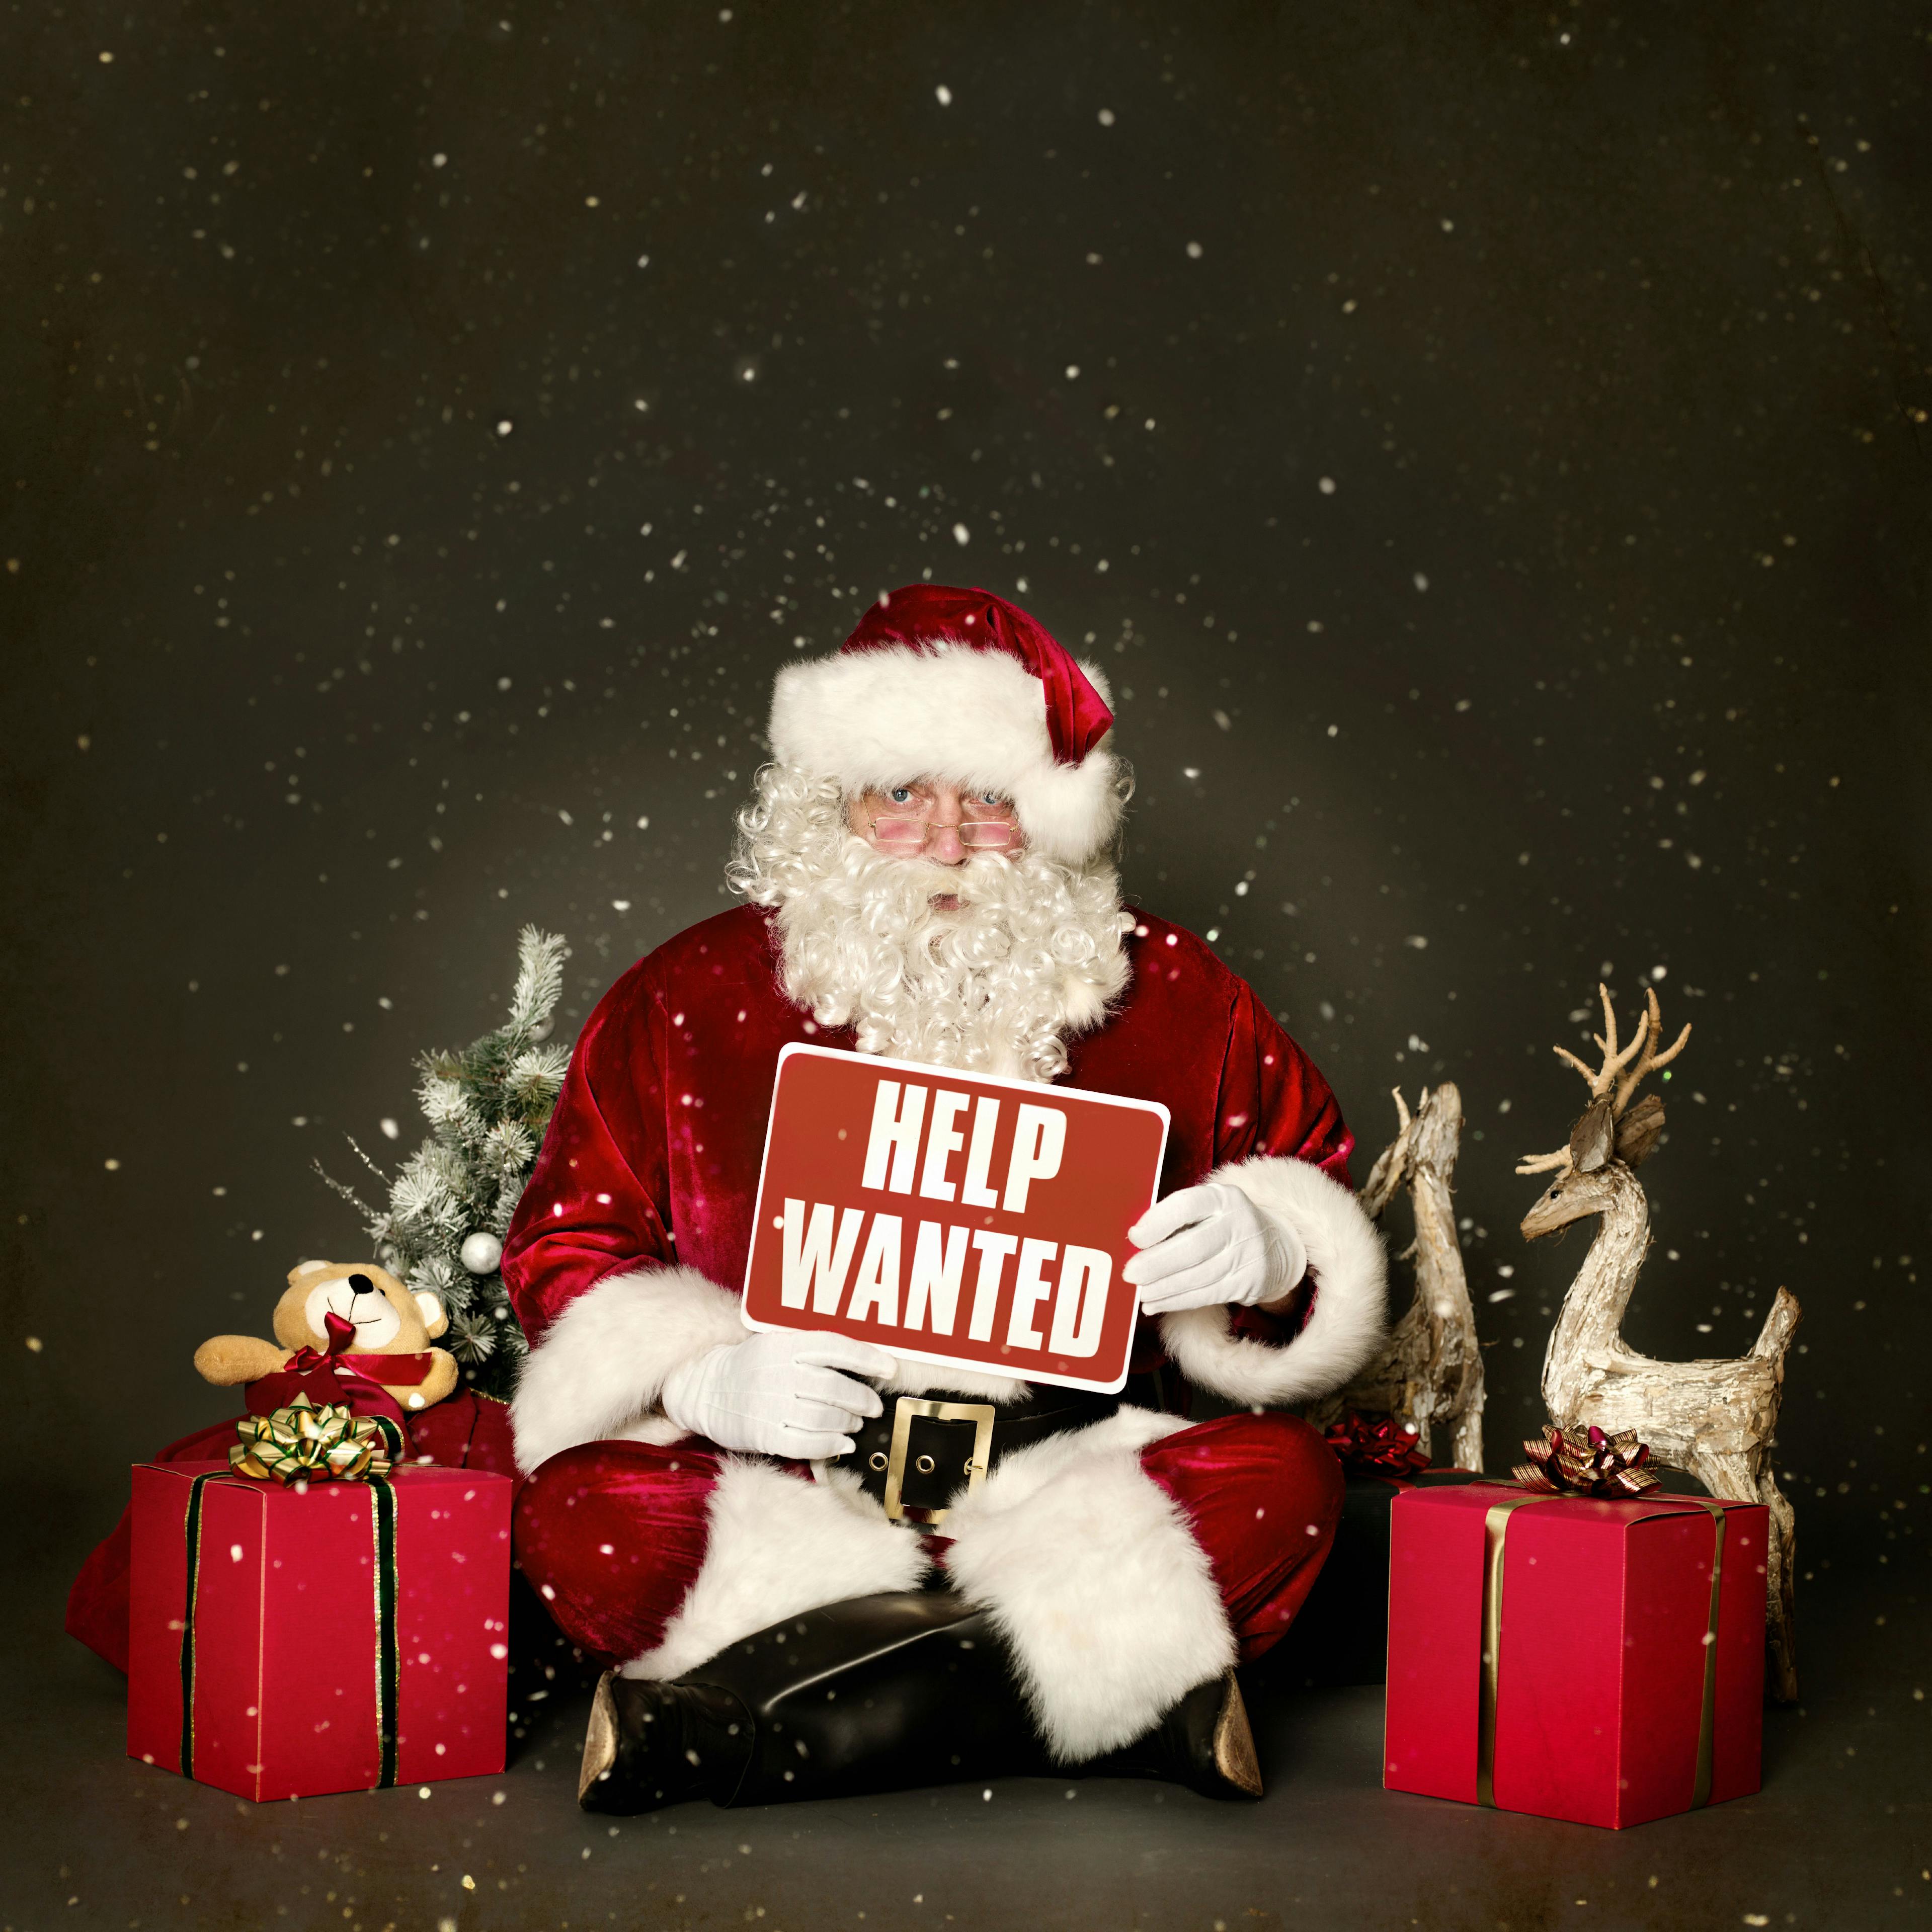 A Santa Claus holding a “help wanted” sign.